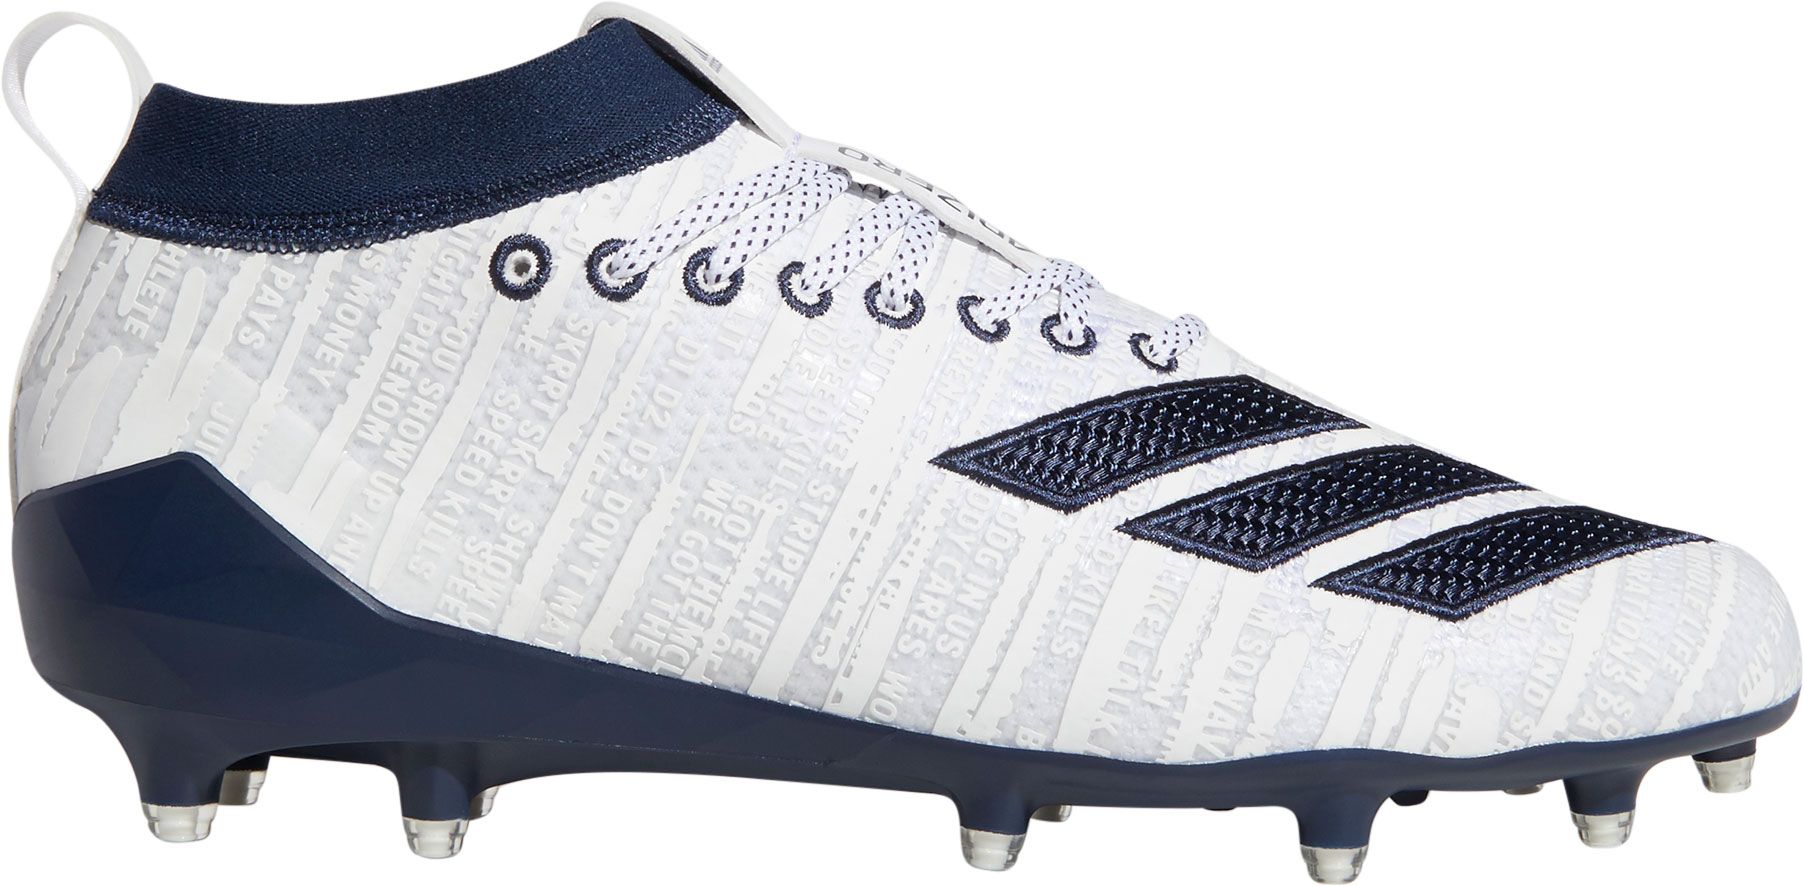 navy and white football cleats